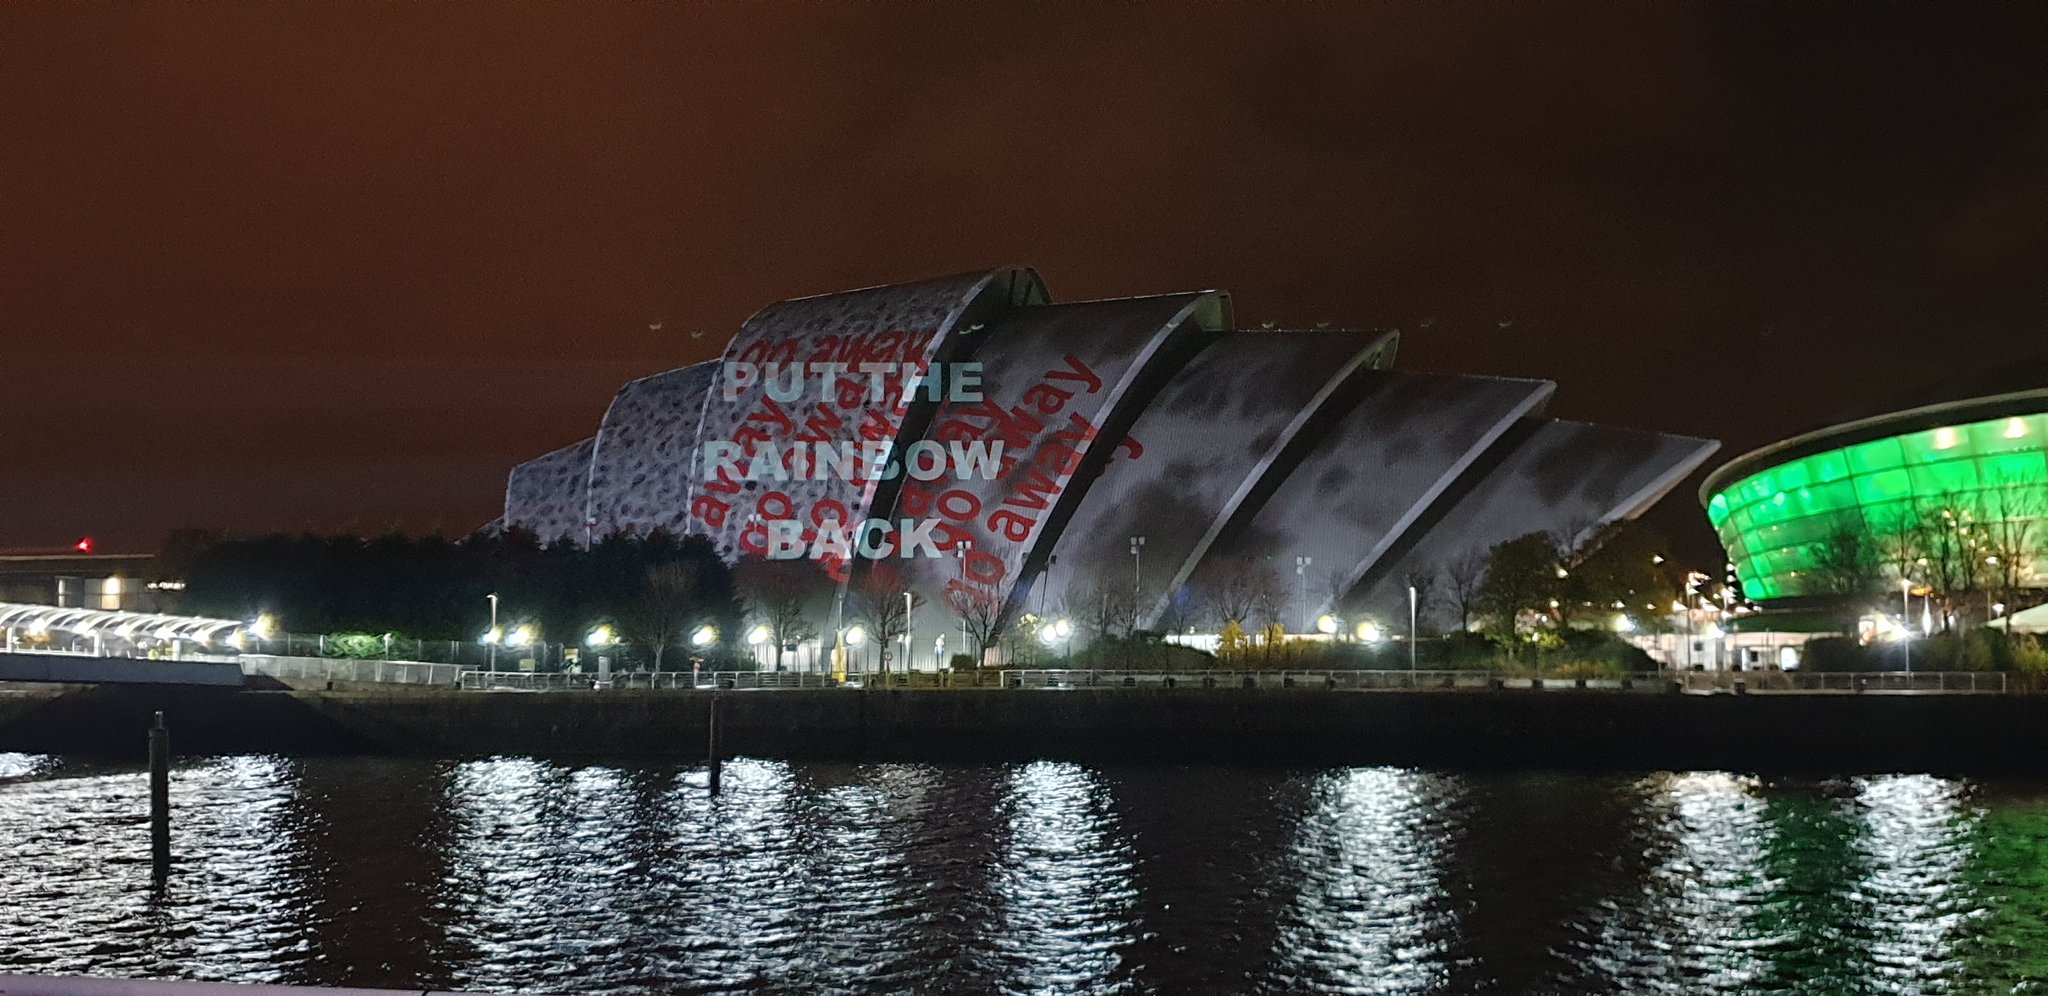 The projector operators tried to obscure the activists’ ‘put the rainbow back’ message.